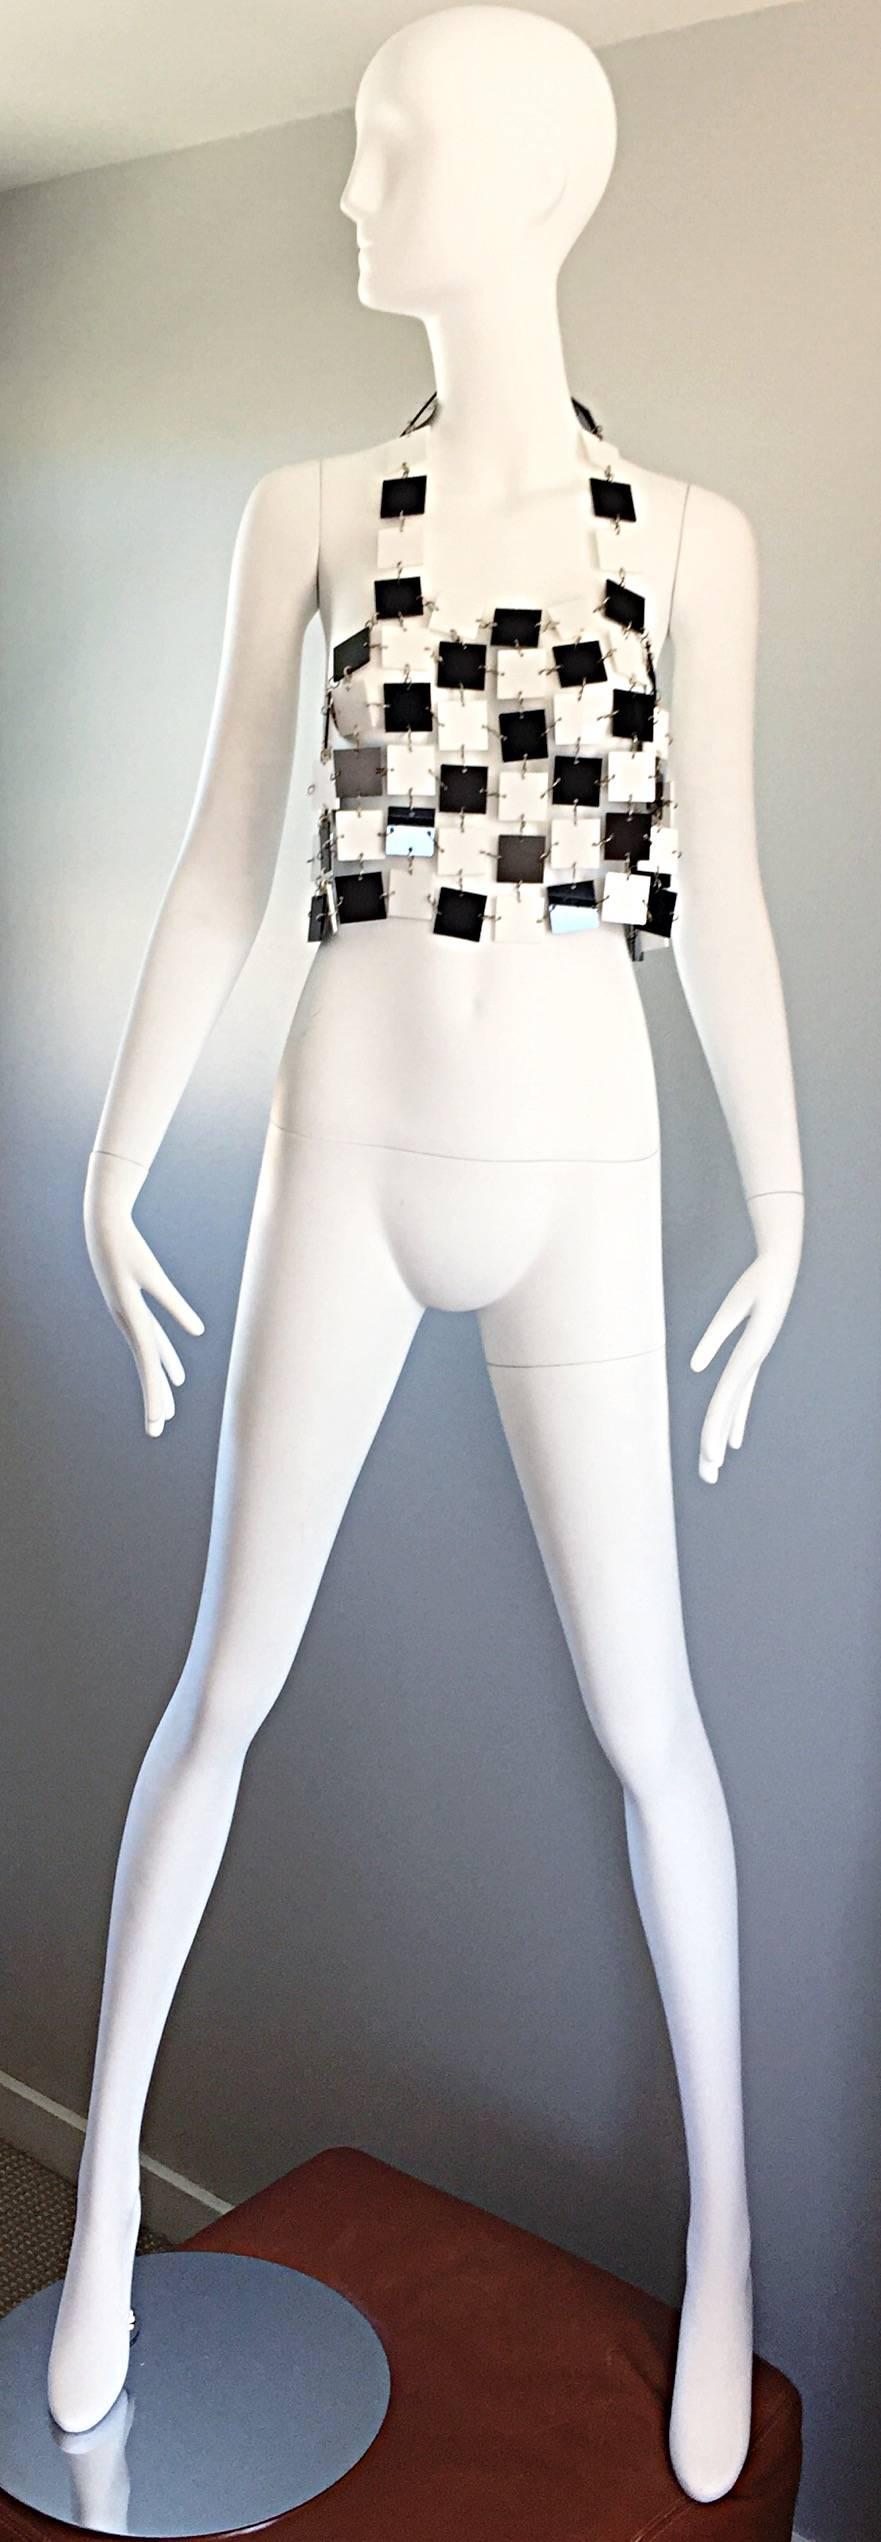 Paco Rabanne Black and White Acrylic Vintage Halter Crop Top, 1960s For Sale 2